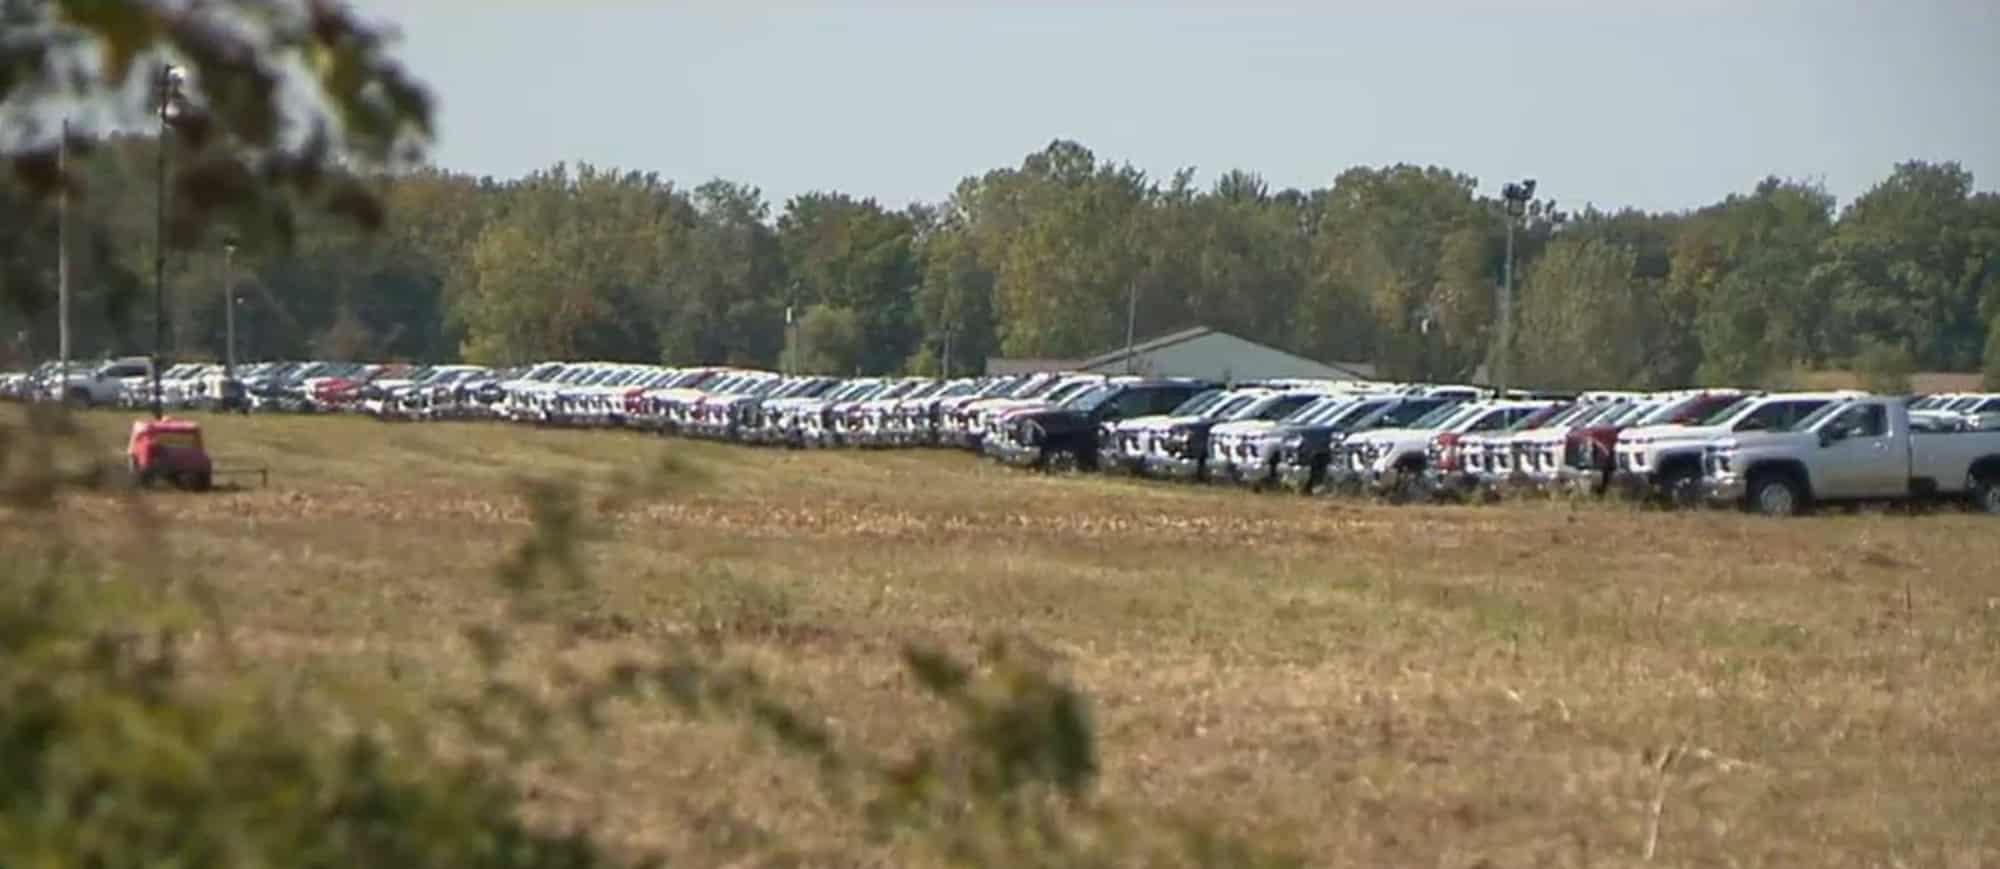 hundreds of unfinished gm trucks parked in an empty field is a chip nightmare 170403 1